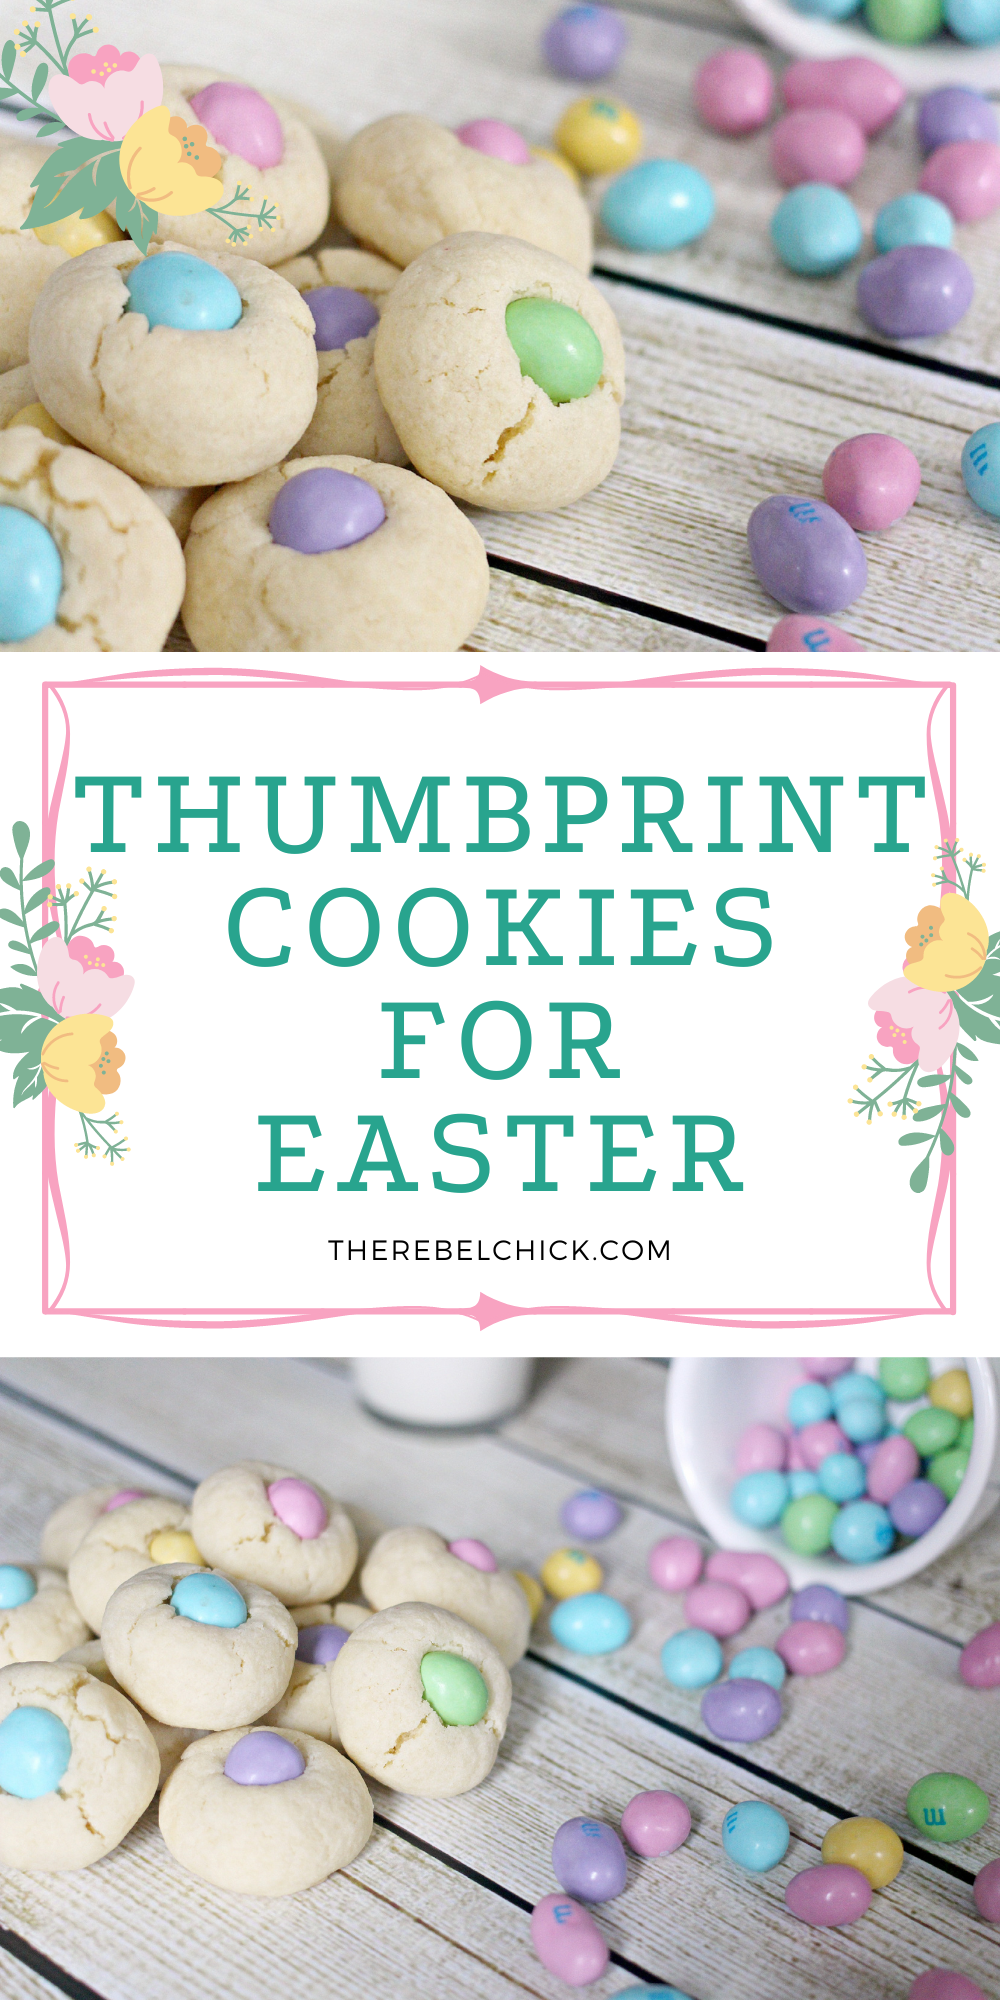 Easter Thumbprint Cookies filled with pastel M&Ms